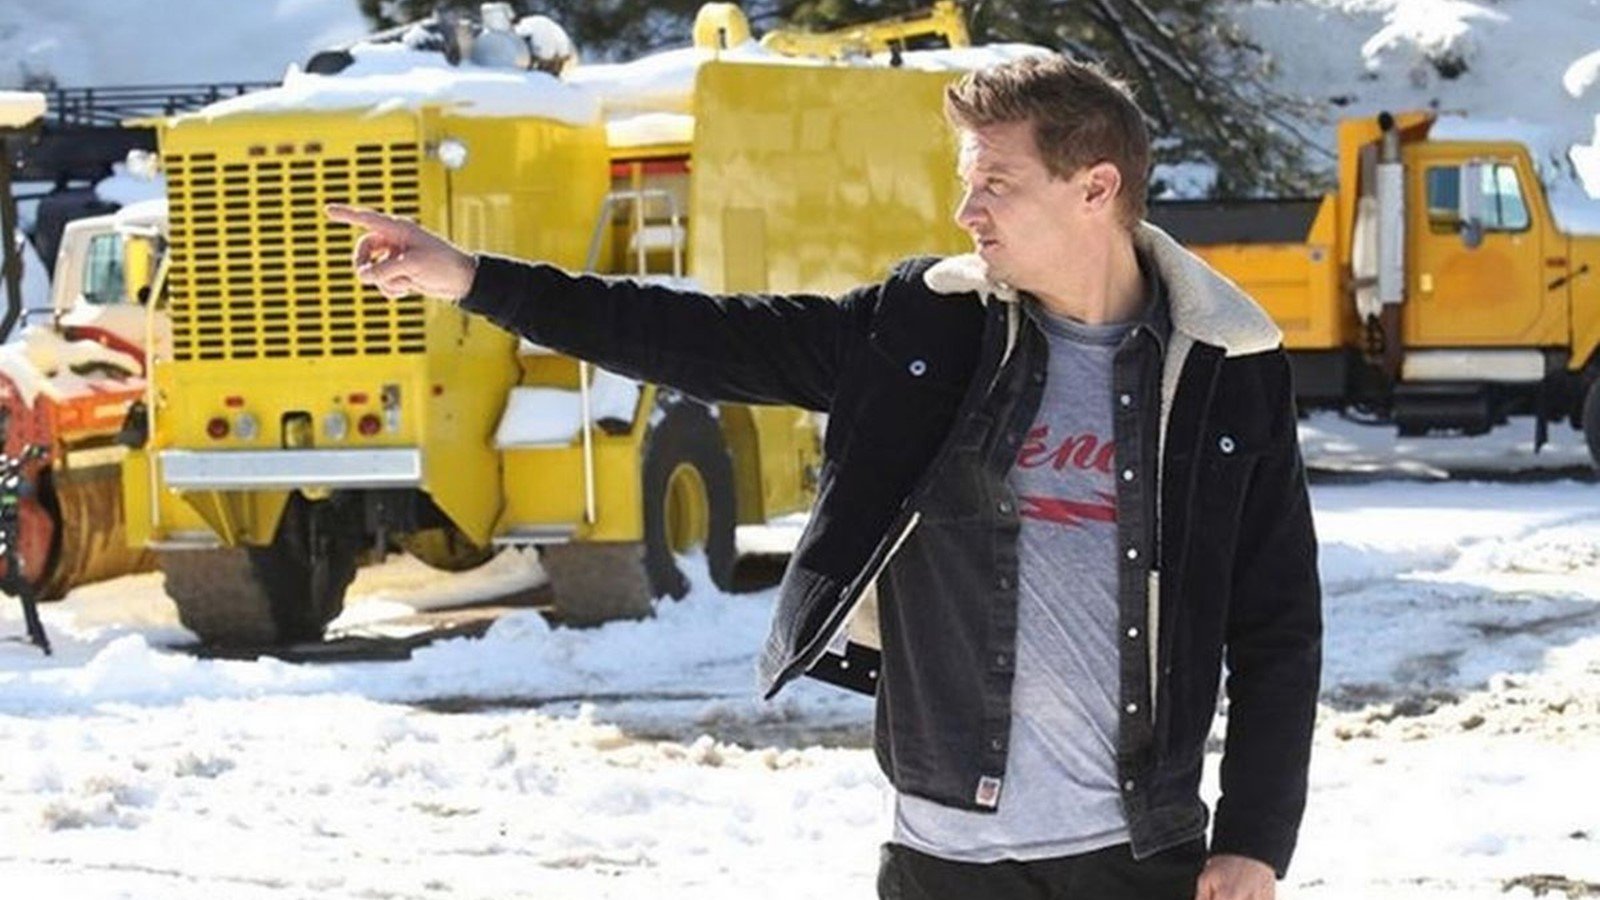 Jeremy Renner celebrates the homecoming of the snowplow that hit him